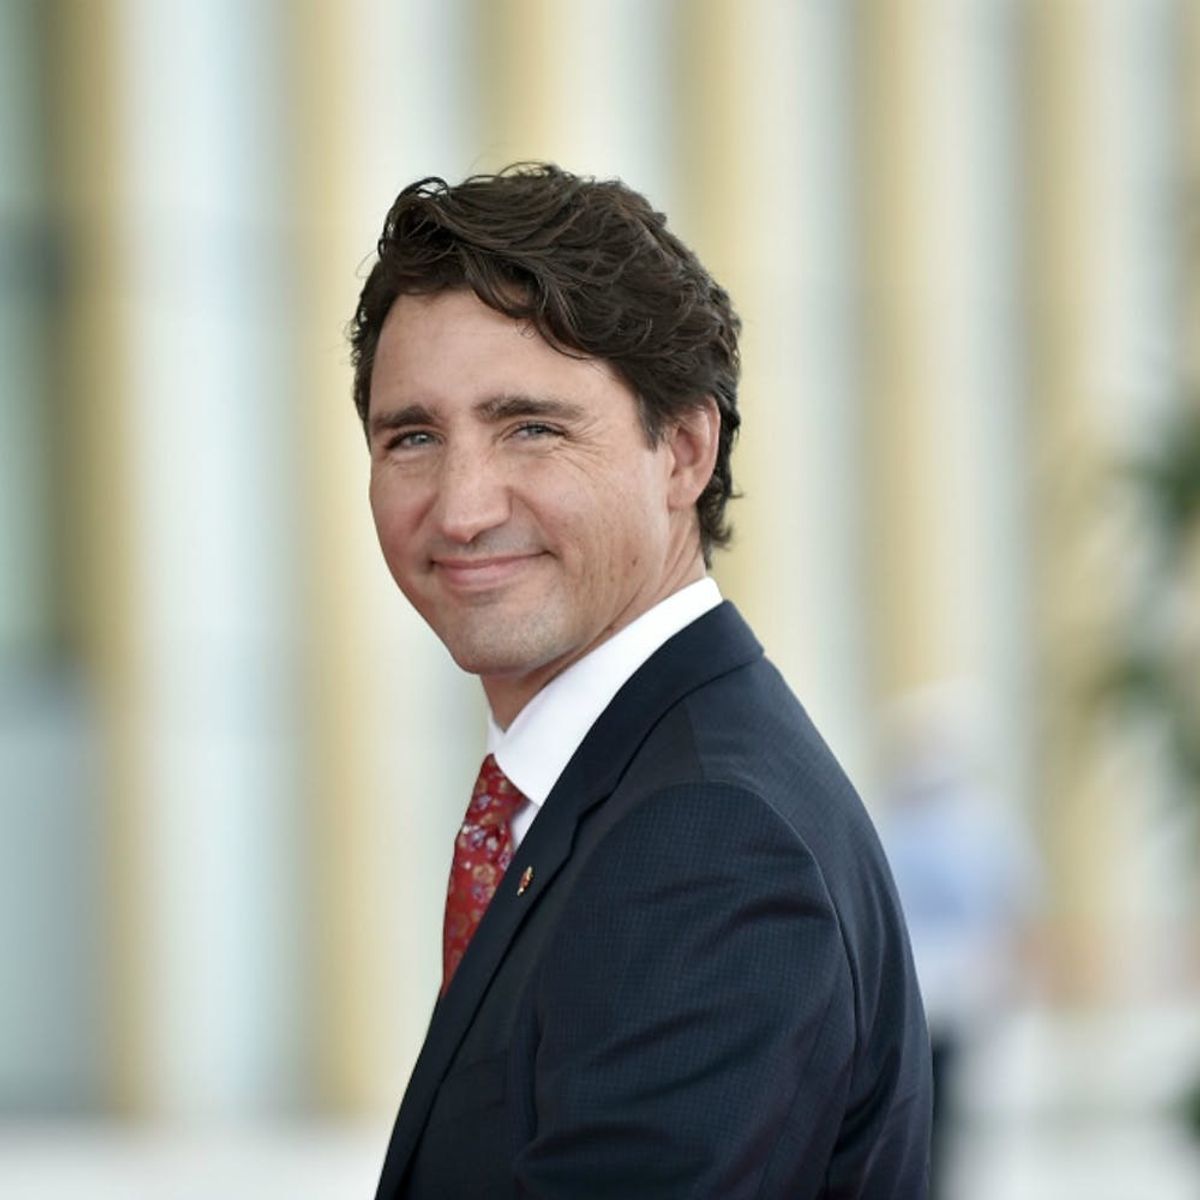 Canadian PM Justin Trudeau Just Pledged $650 Million in Support of Global Women’s Health Initiatives